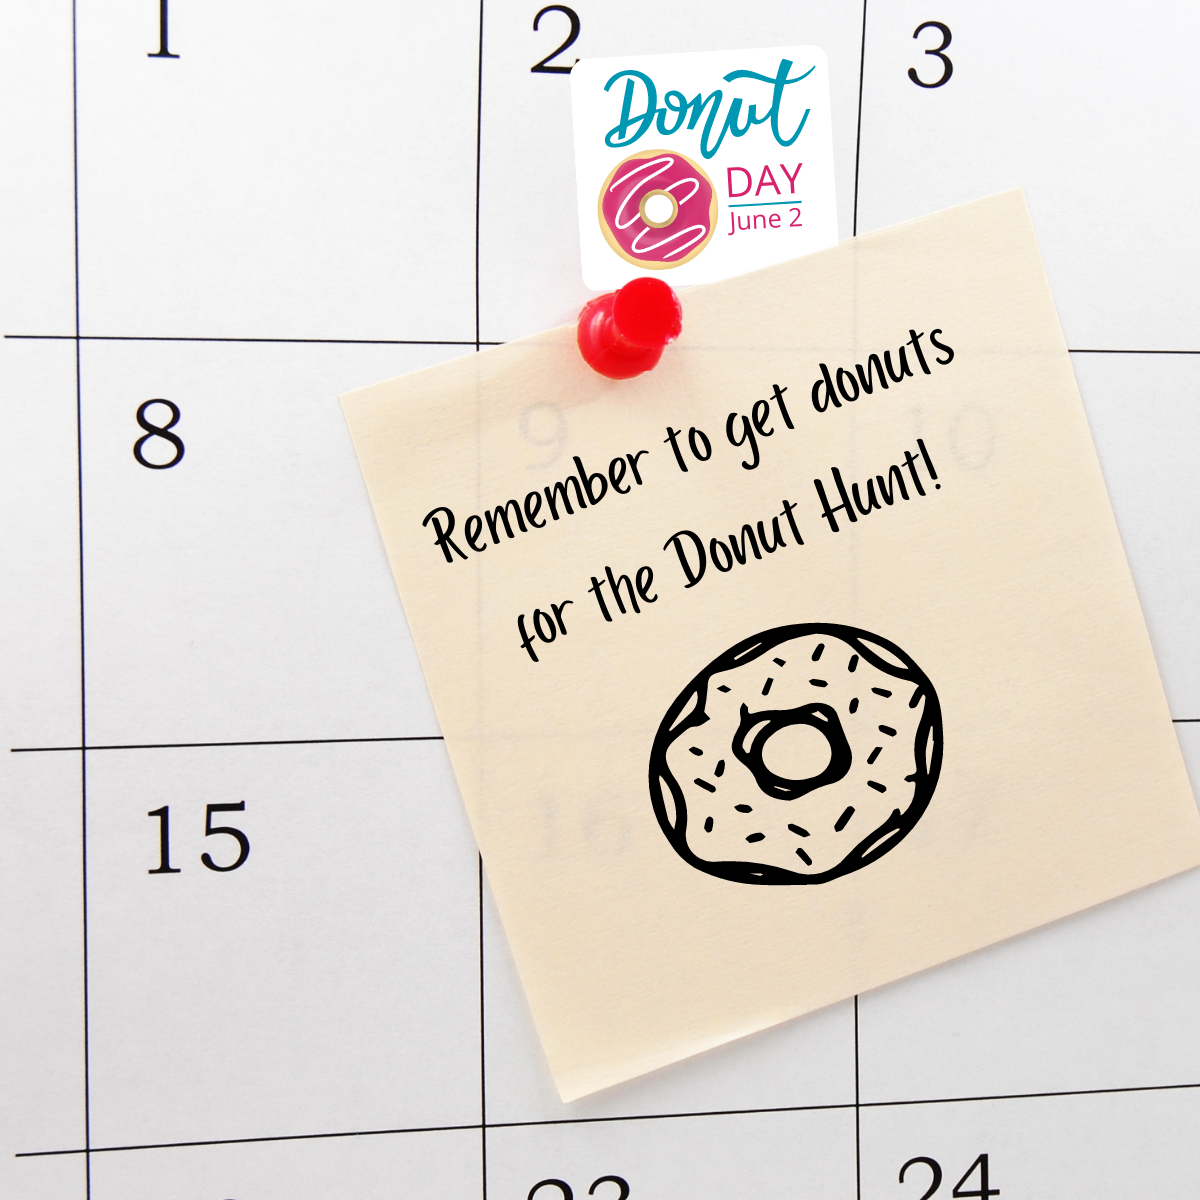 A reminder is posted on a calendar to get donuts for the Donut Hunt on June 2nd.